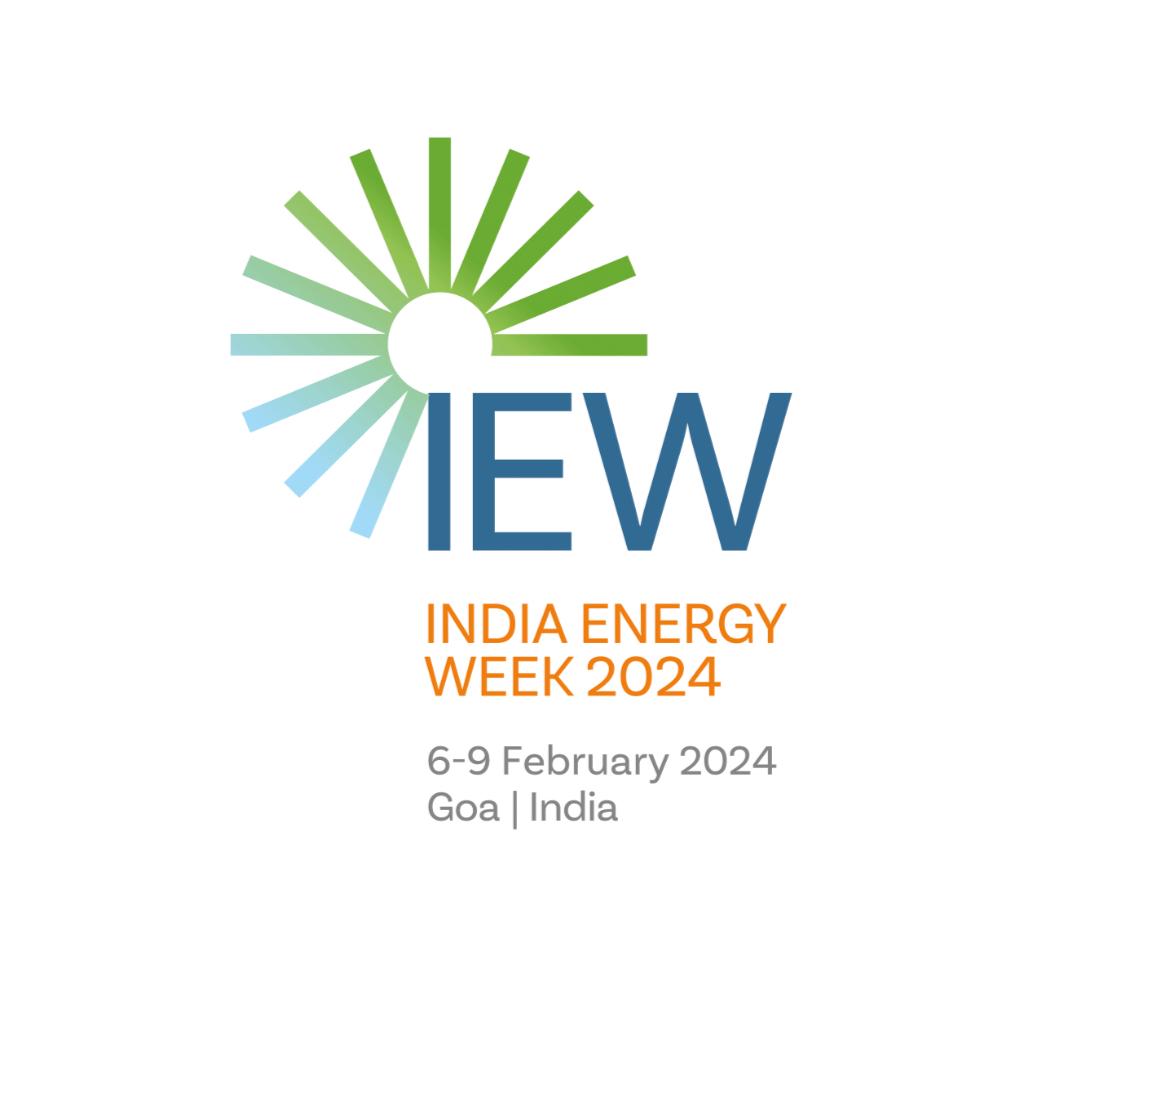 Second edition of India Energy Week (IEW) will be held in Goa from